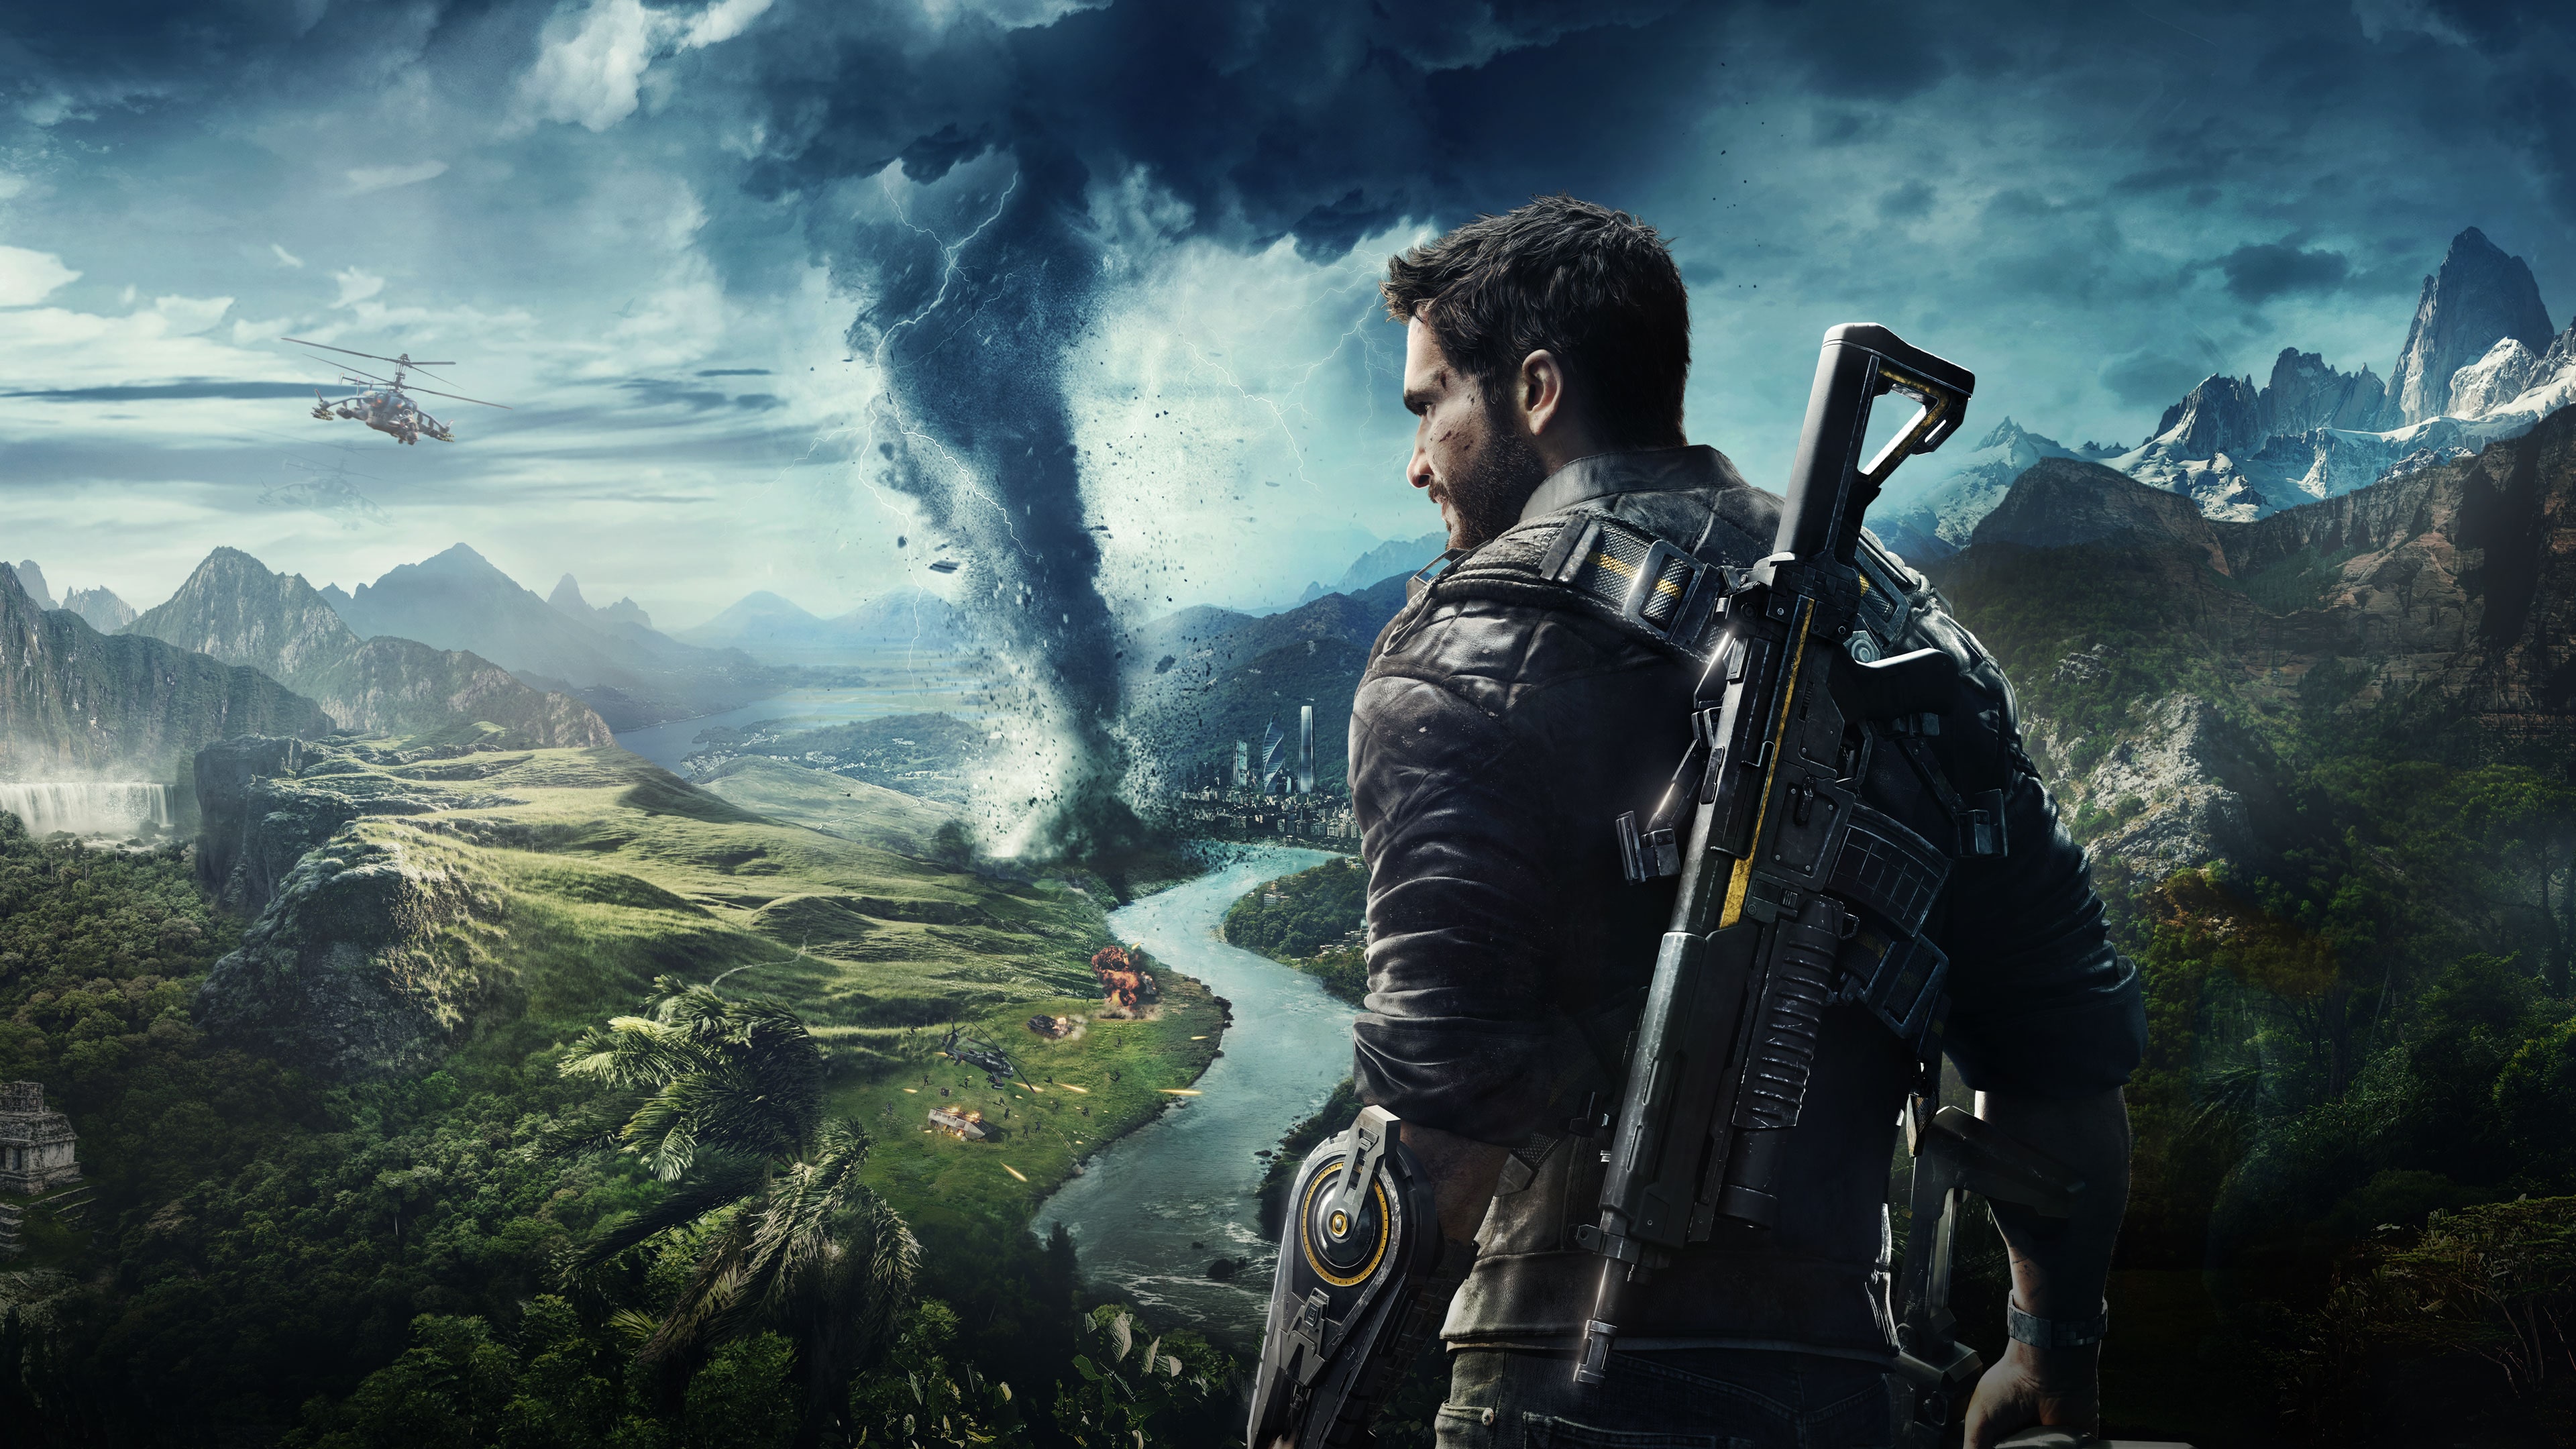 ps4 store just cause 4